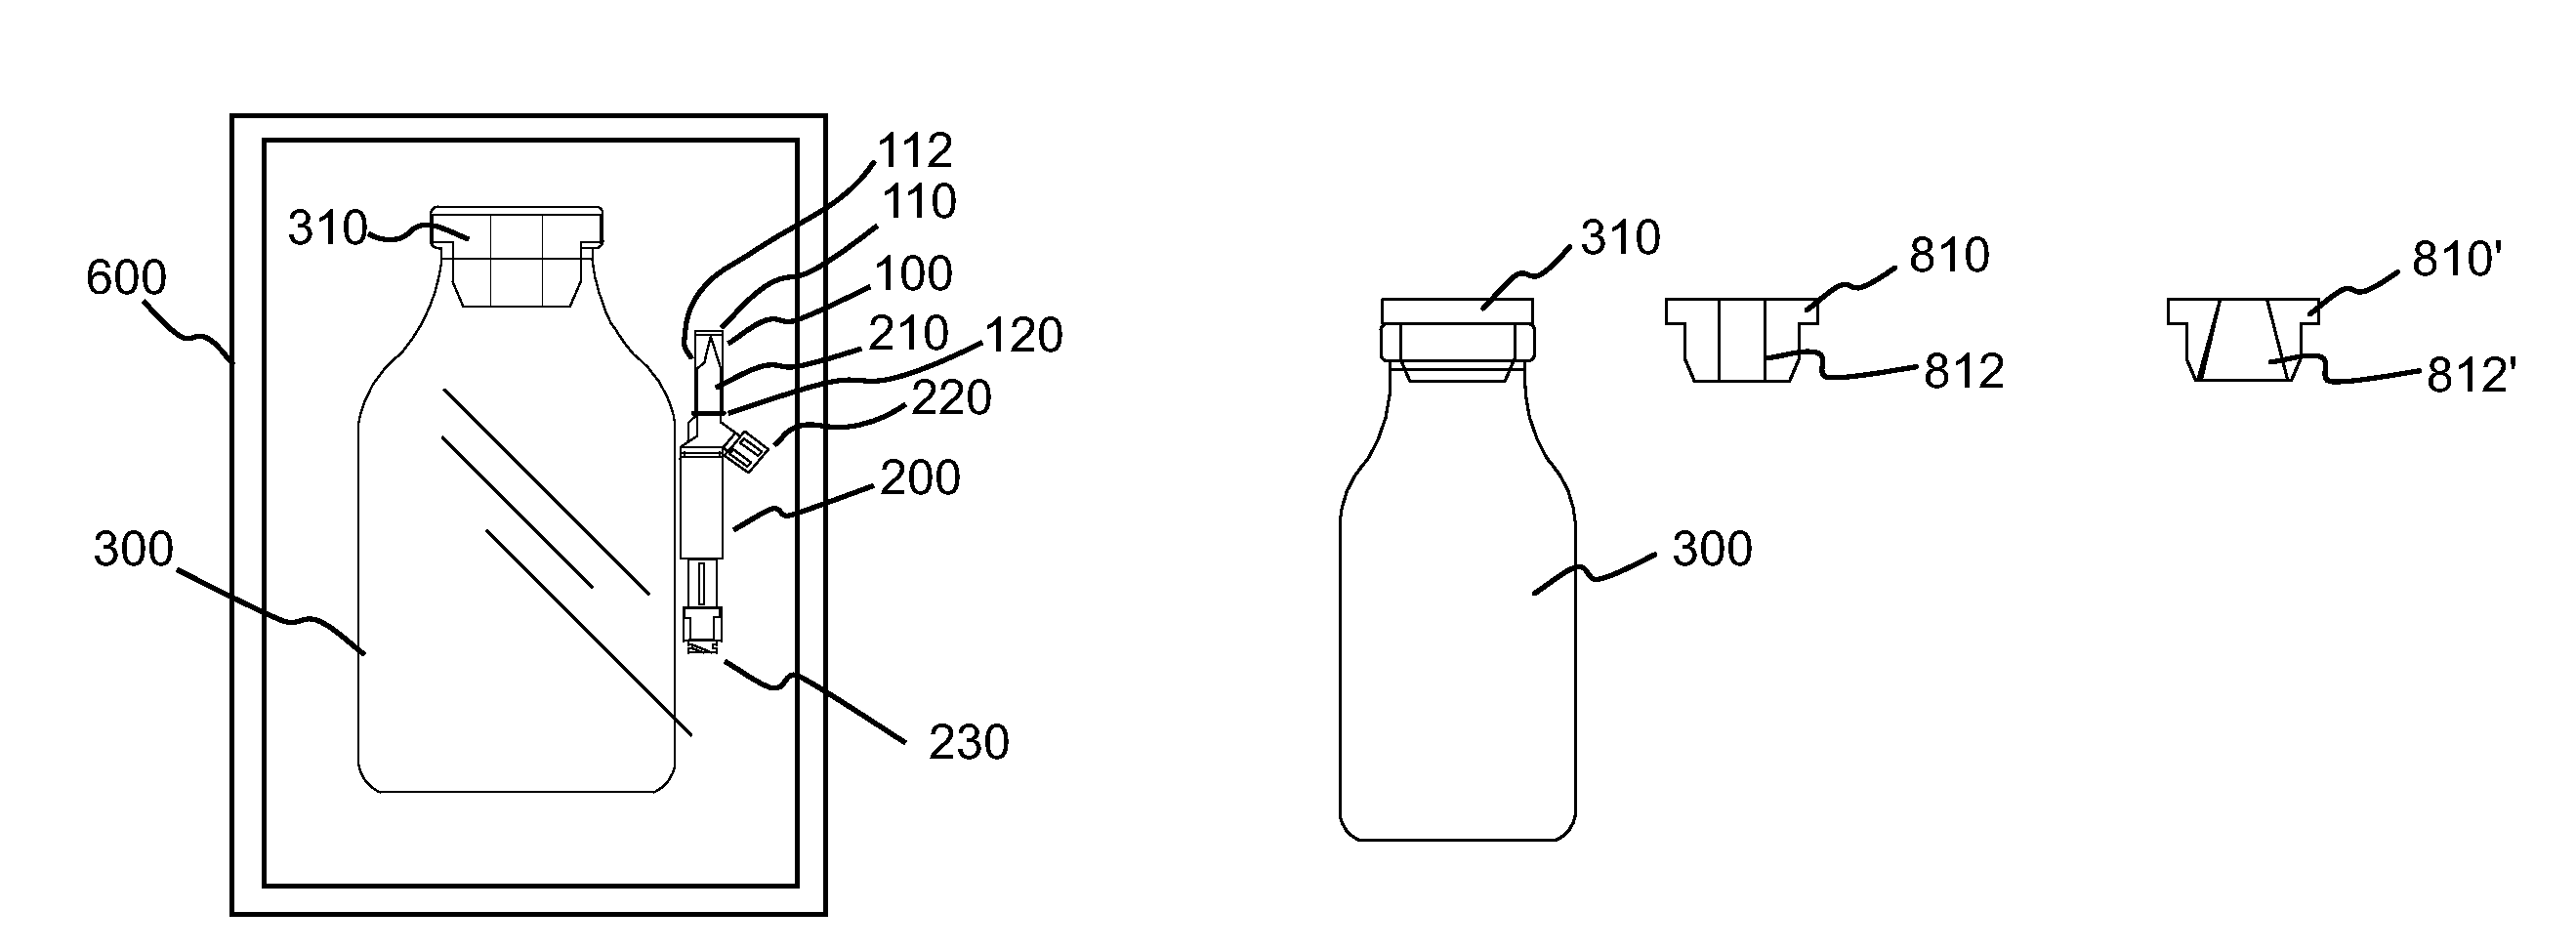 Fluid path connectors and container spikes for fluid delivery